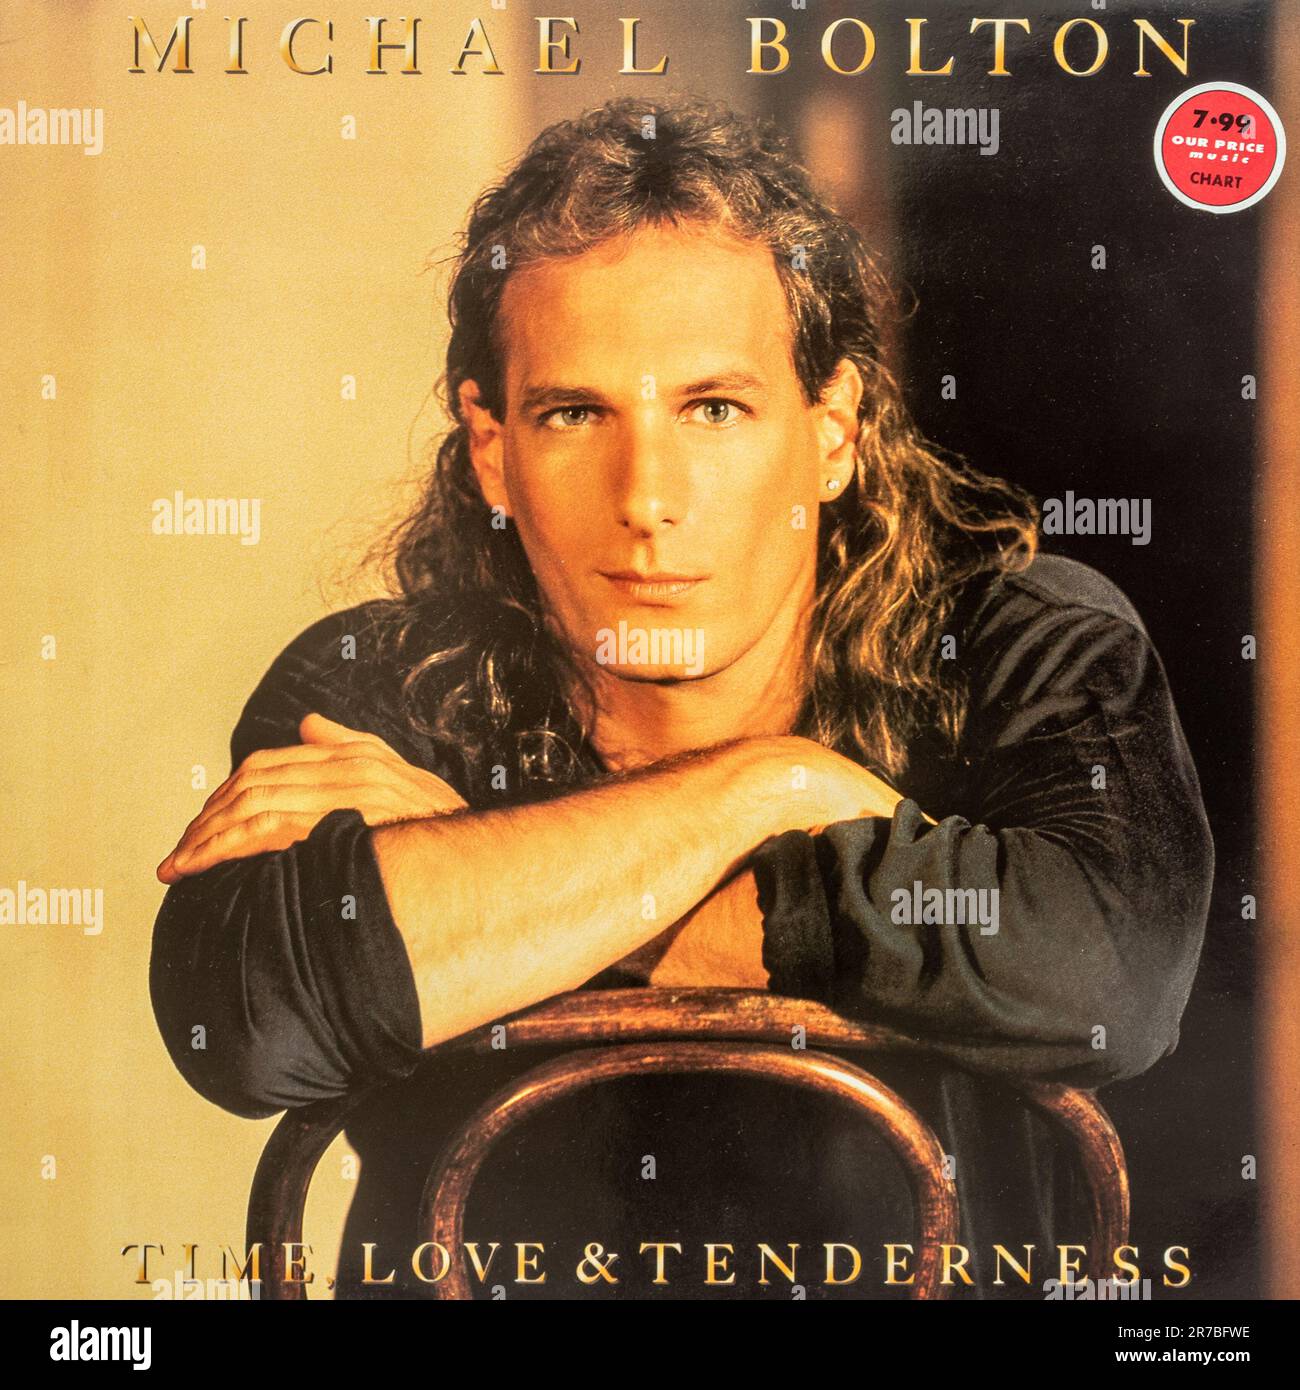 The Love & Tenderness album by Michael Bolton, vinyl record cover Stock Photo